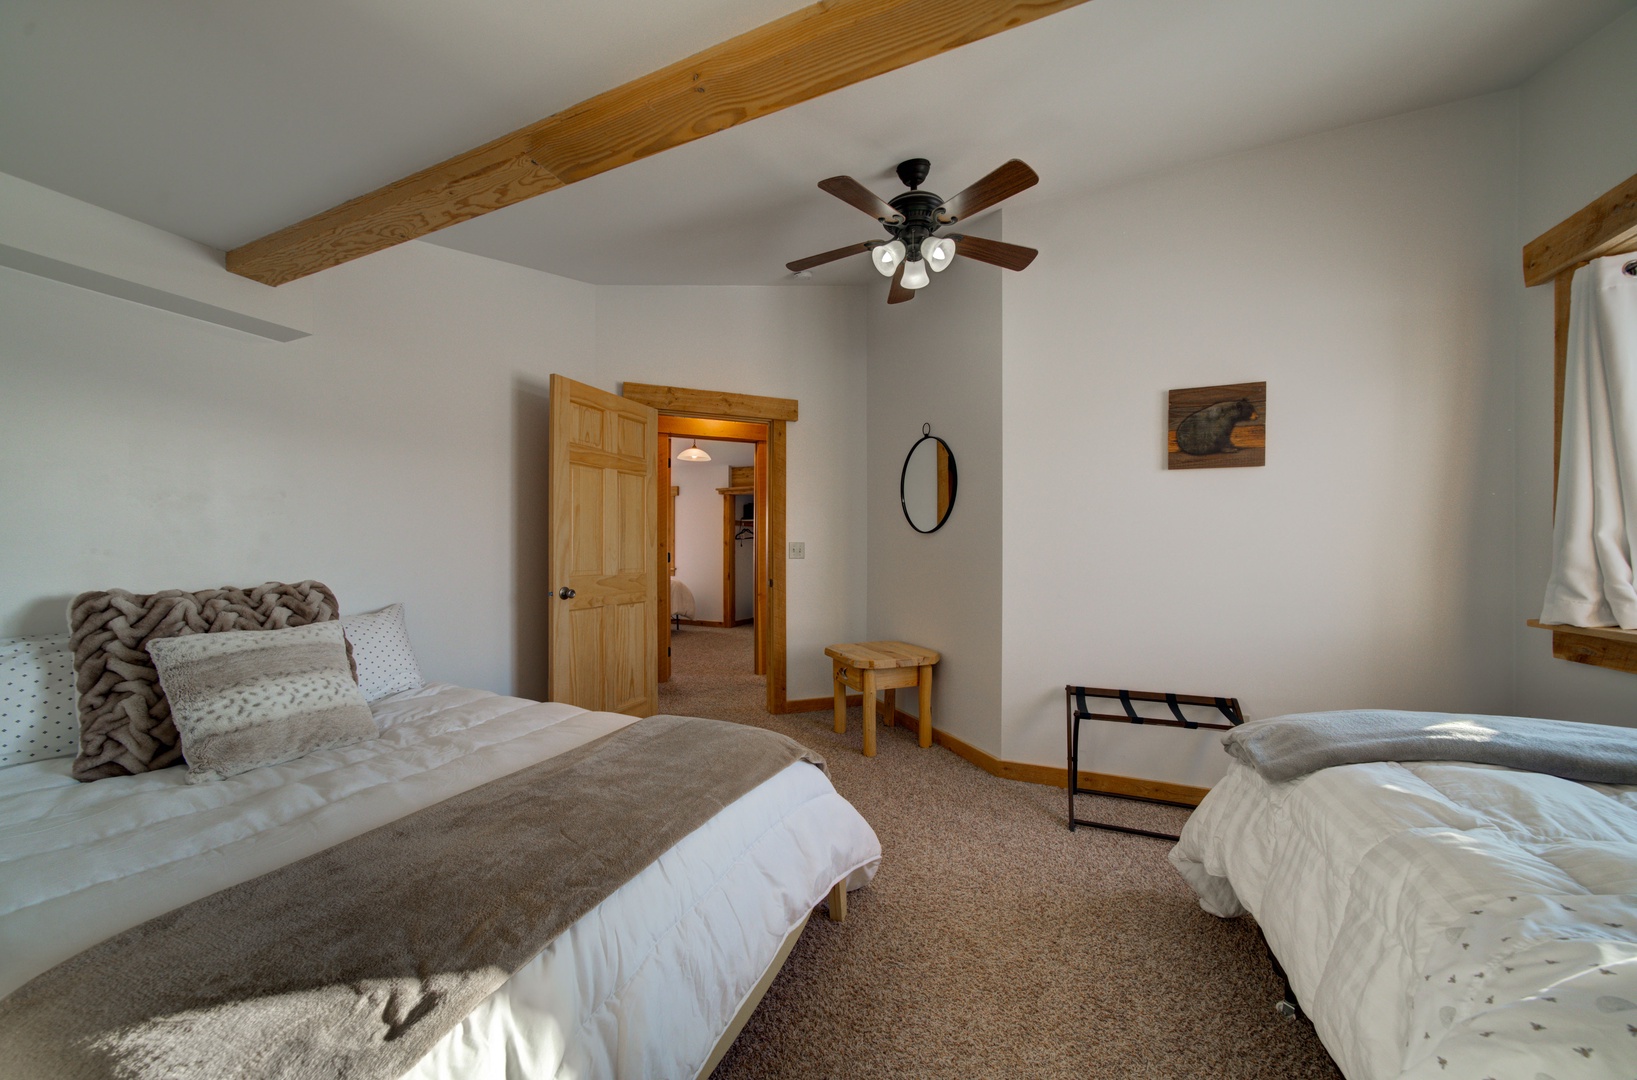 Livingston Vacation Rentals, OFB Sunset Grove - Guest bedroom with queen bed and double bed